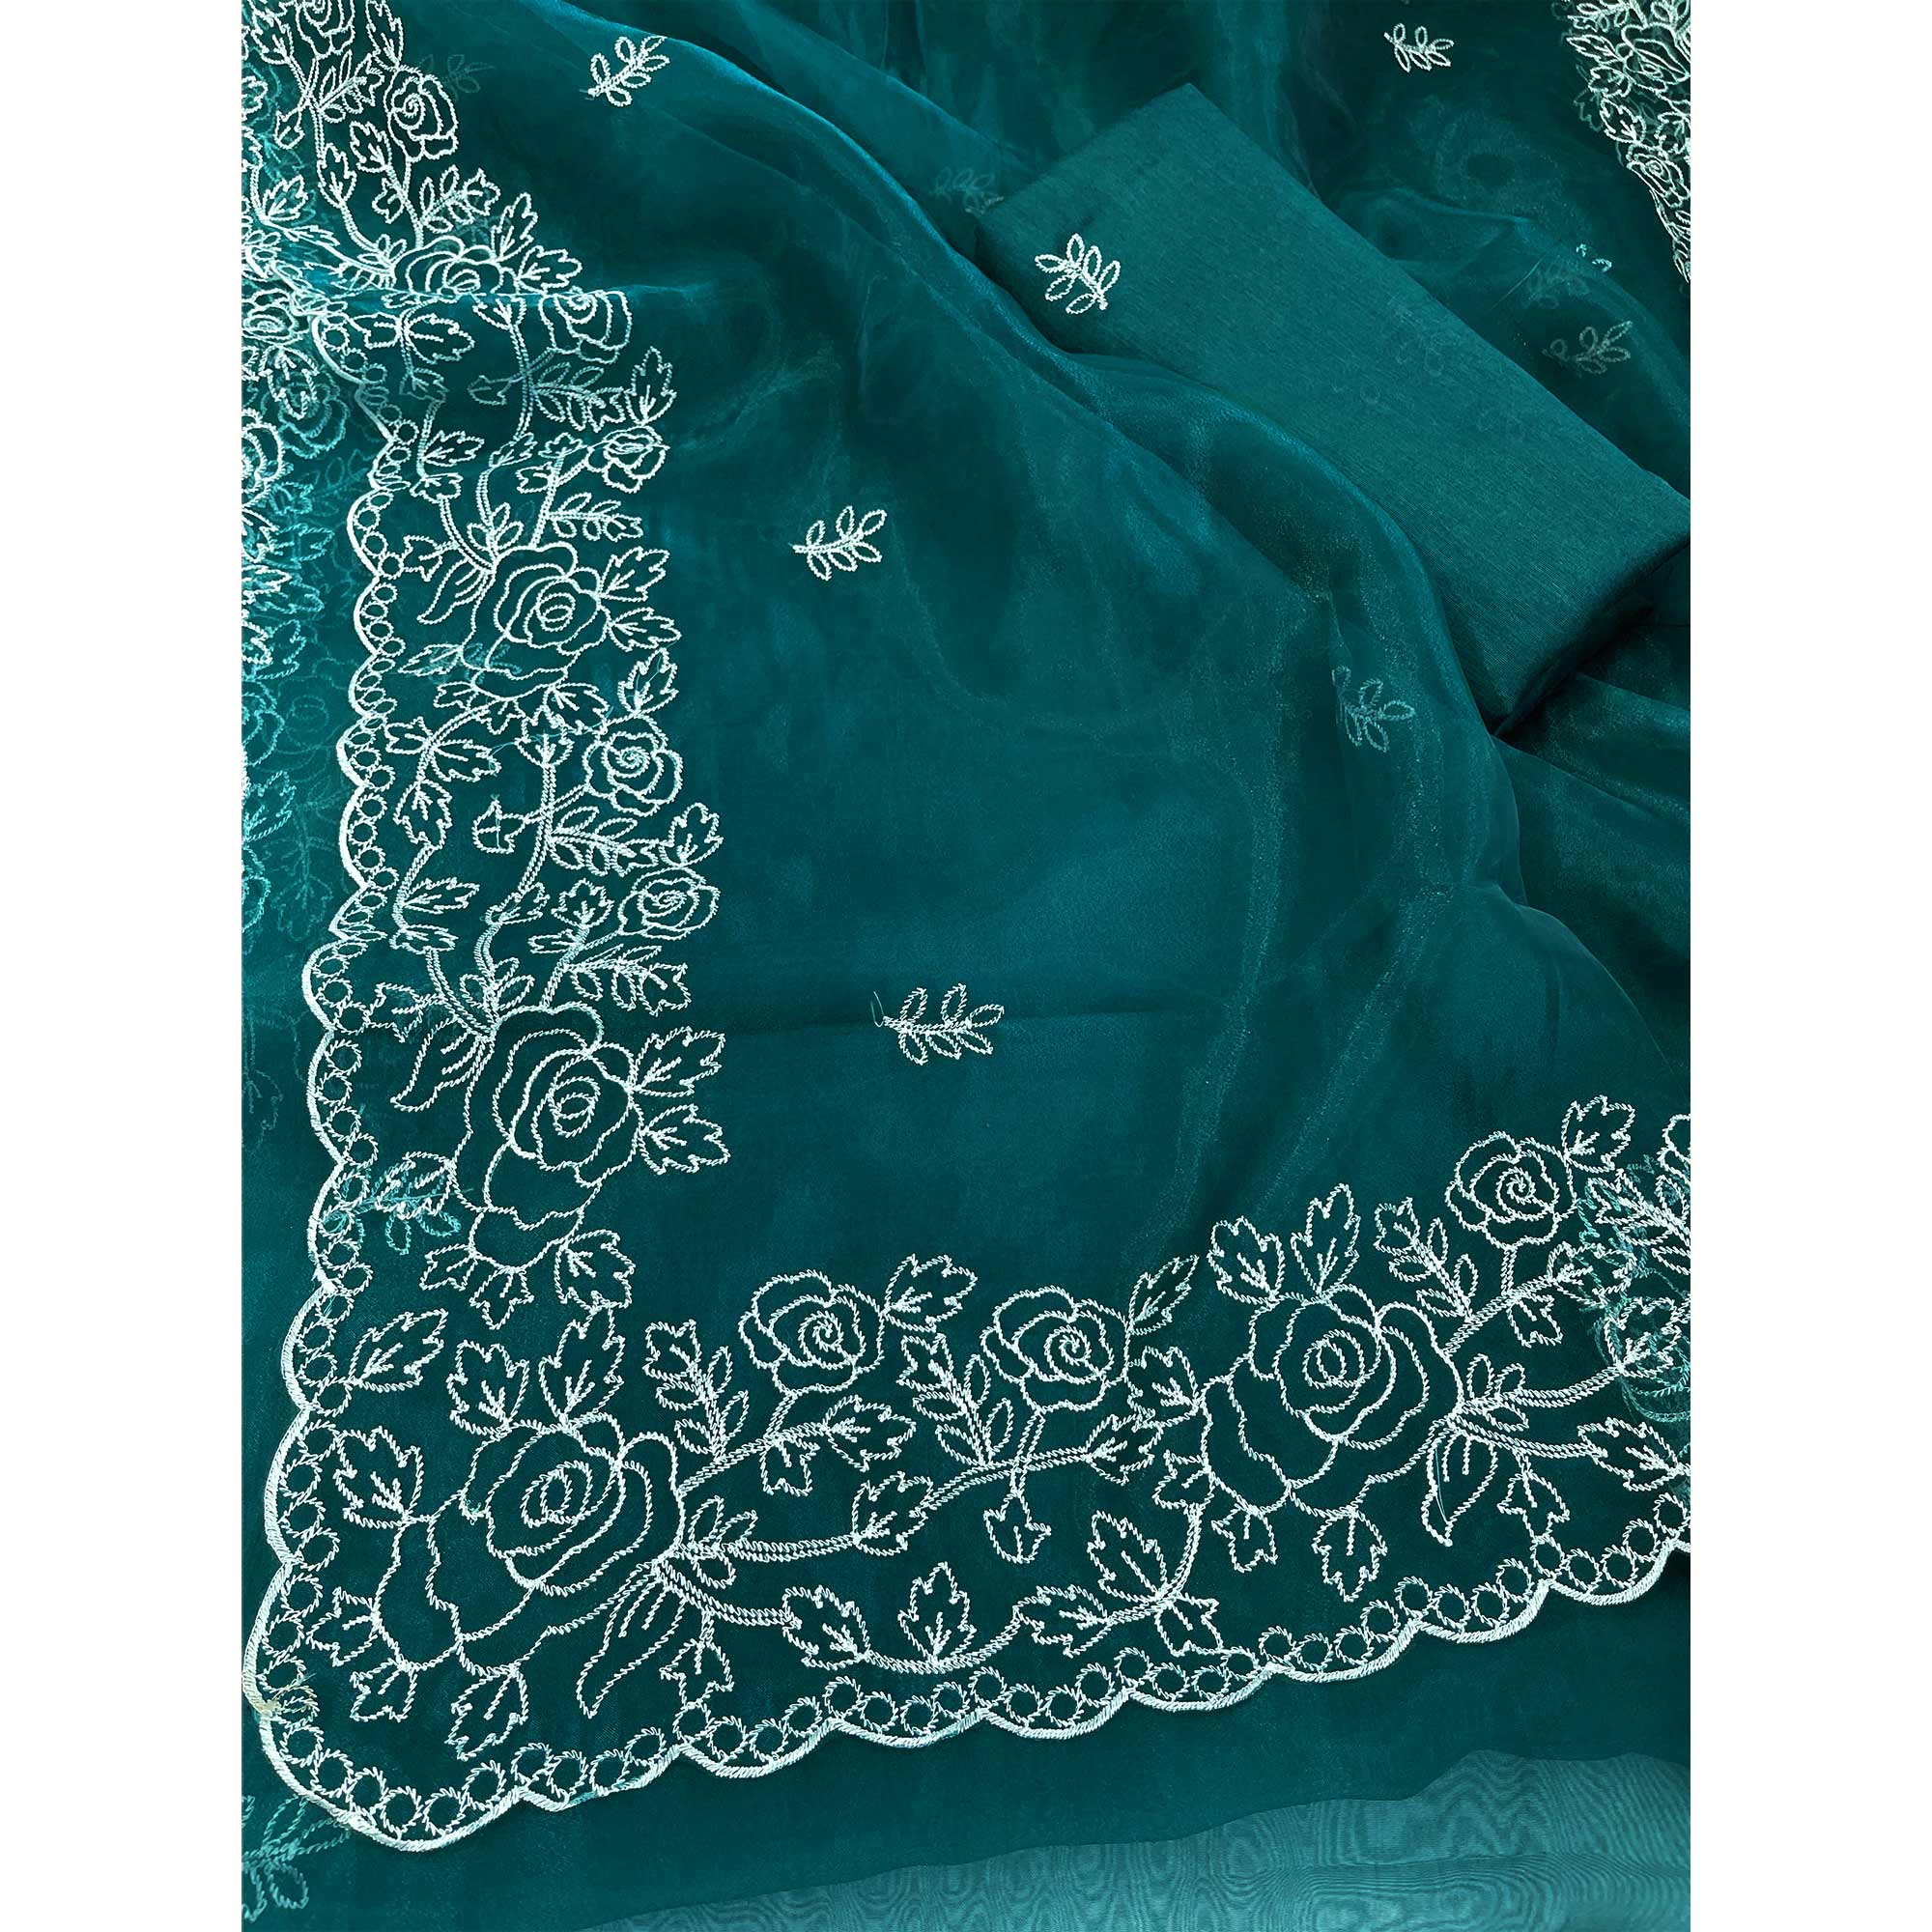 Teal Floral Embroidered Organza Saree